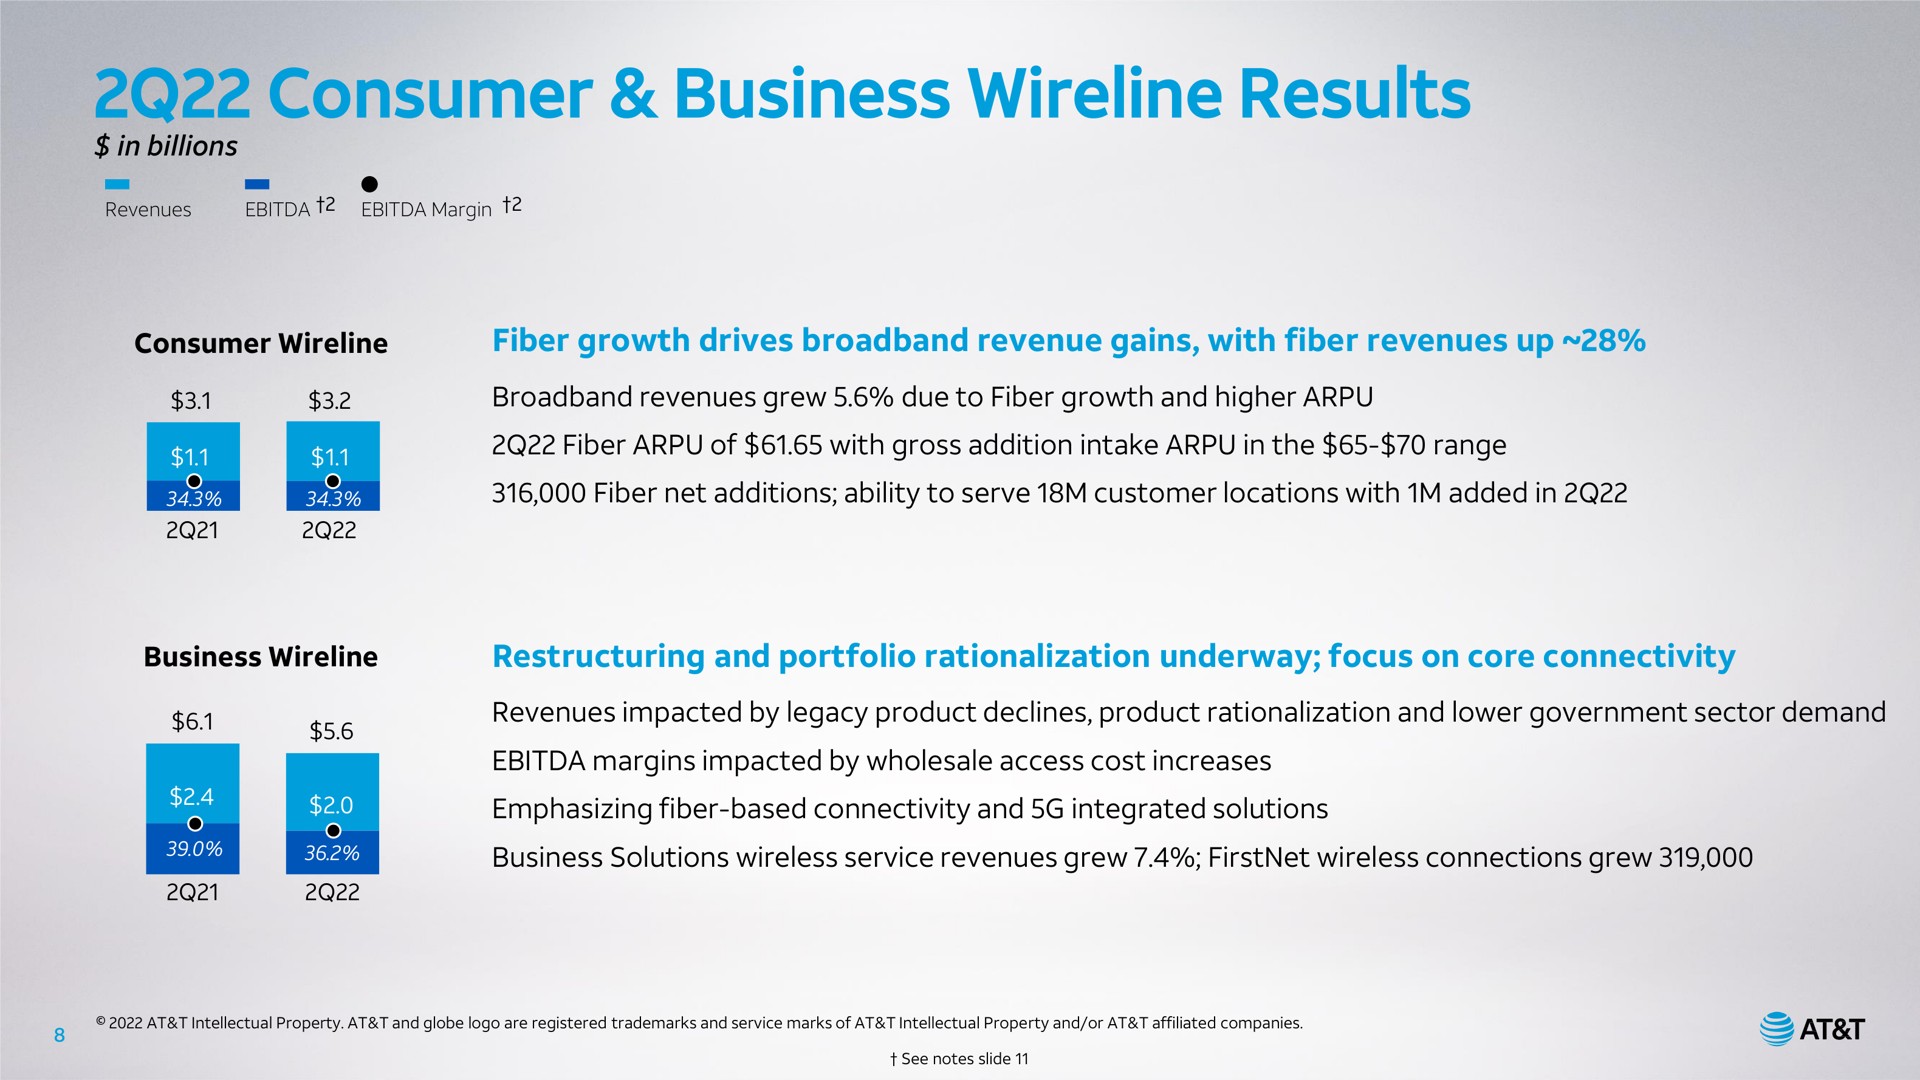 consumer business results fiber growth drives revenue gains with fiber revenues up and portfolio rationalization underway focus on core connectivity | AT&T